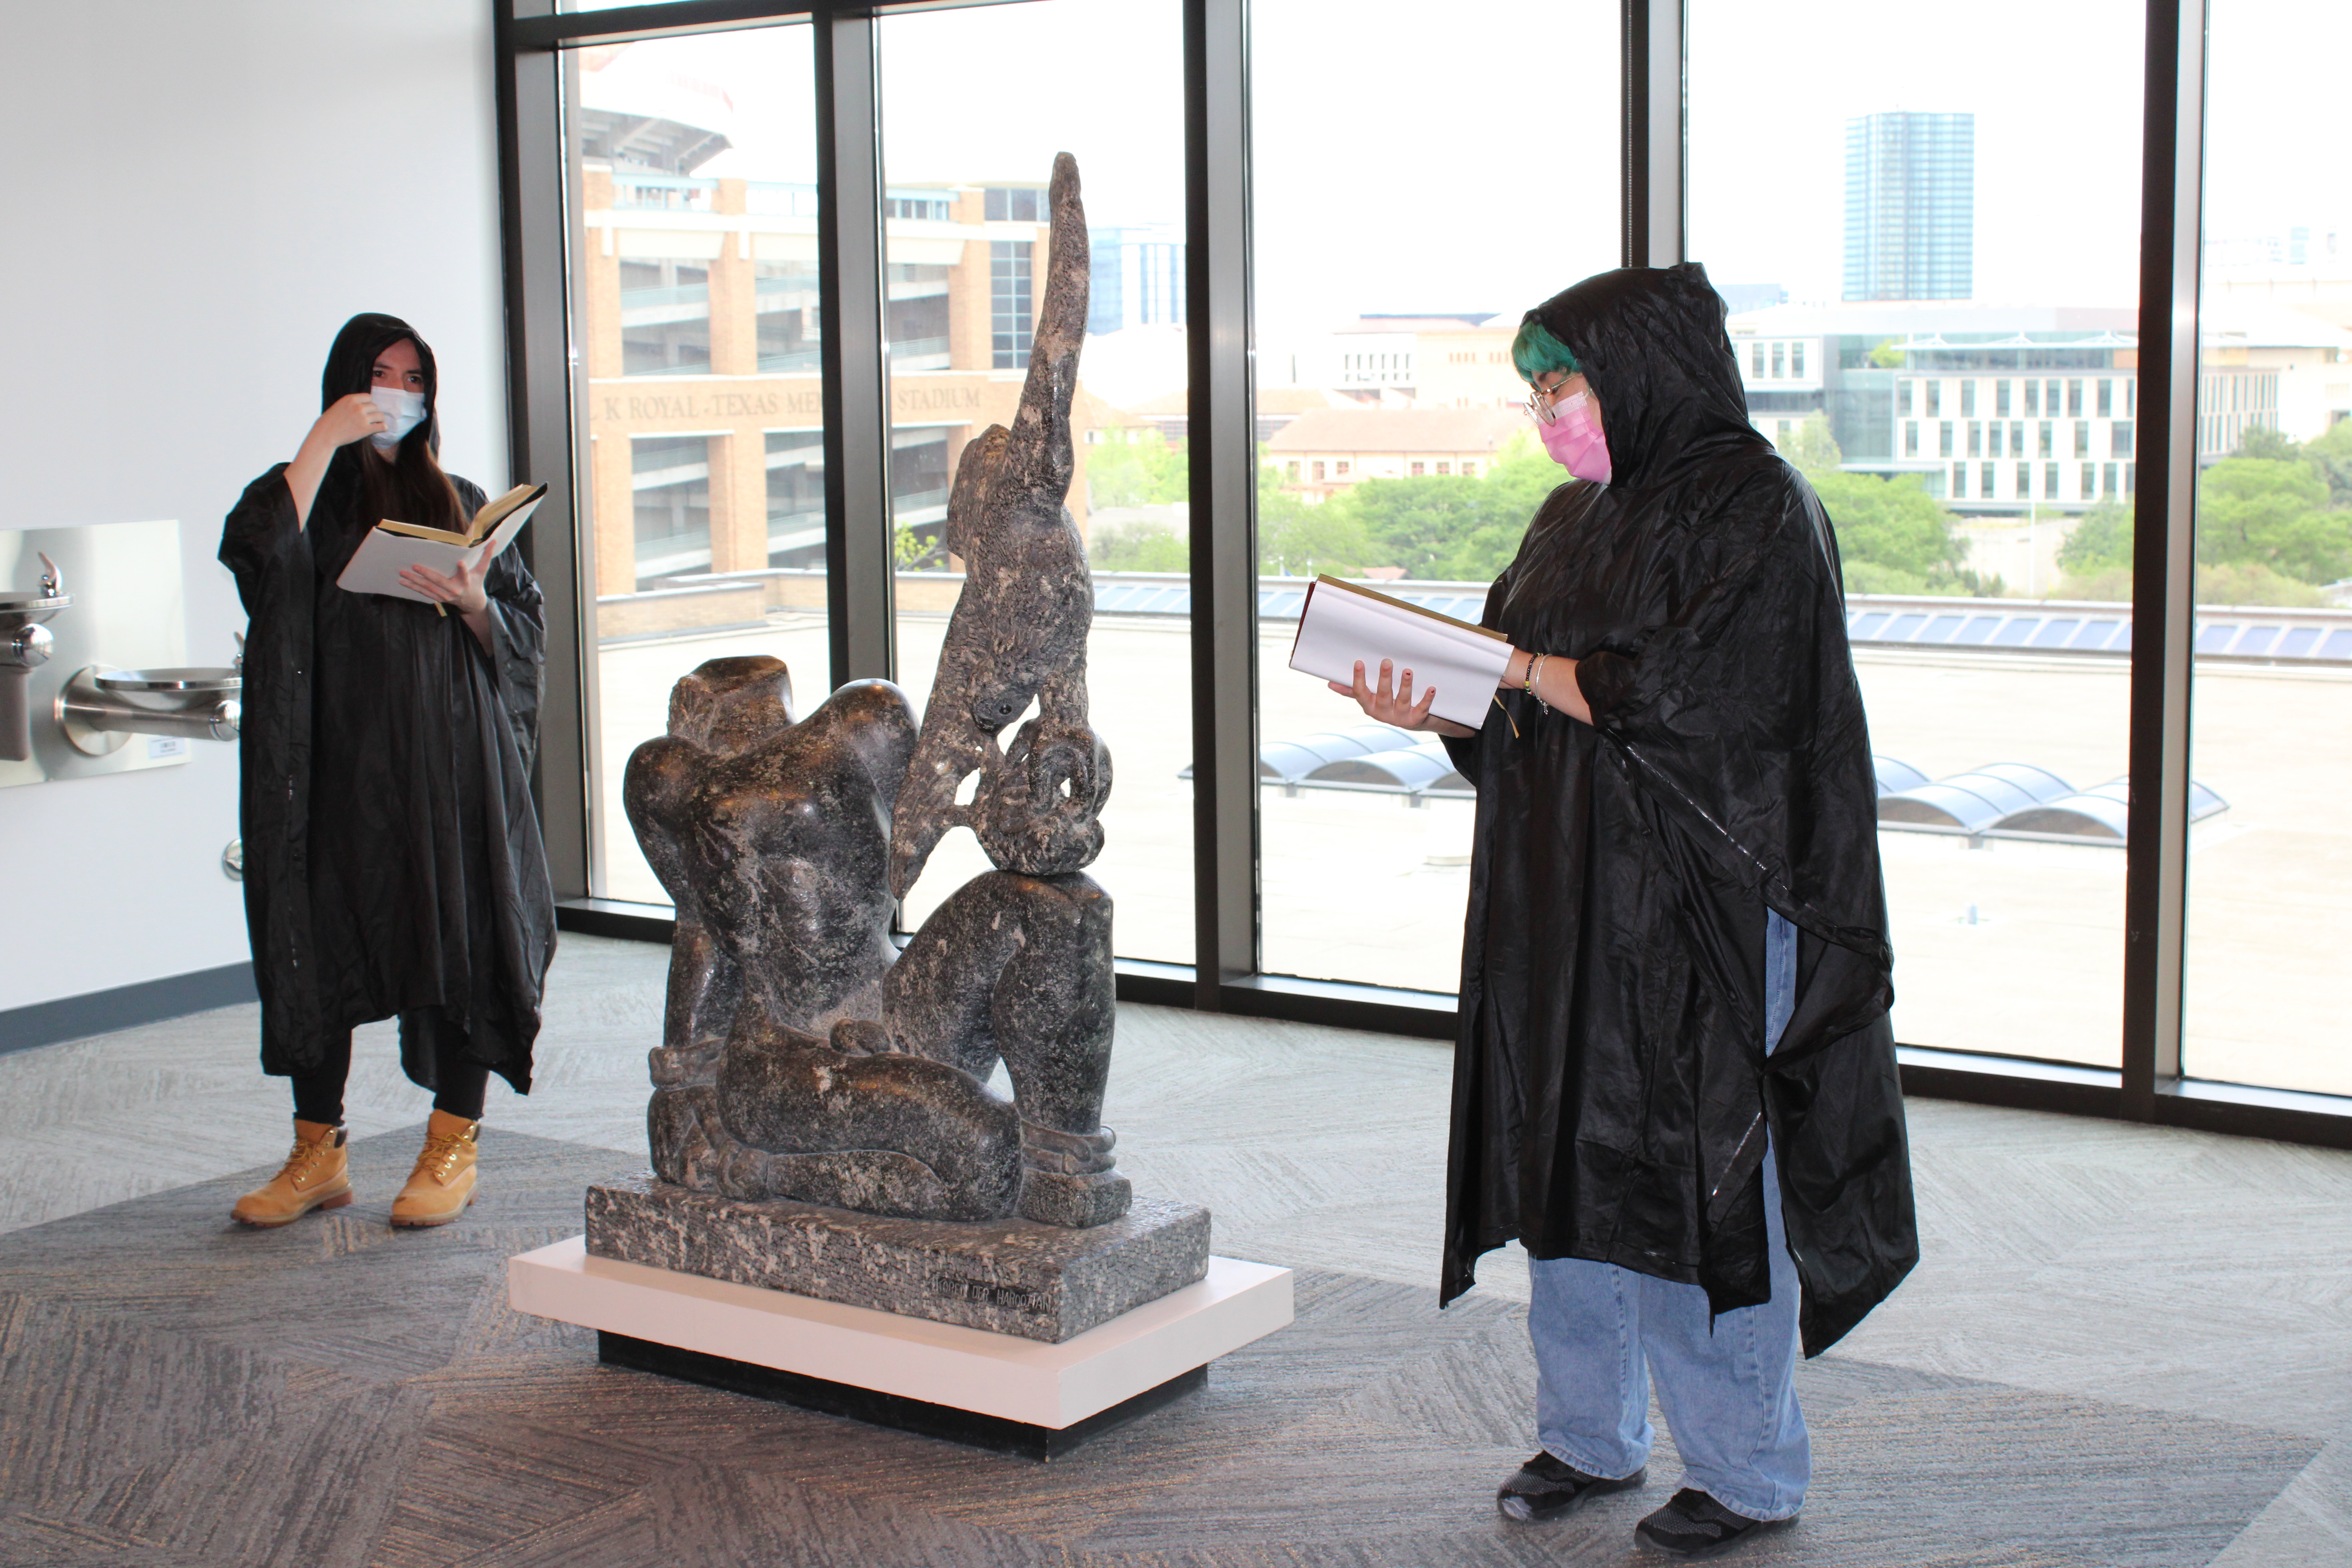 Two students dressed as a "greek chorus" reveal the myth of Prometheus and the Vulture 